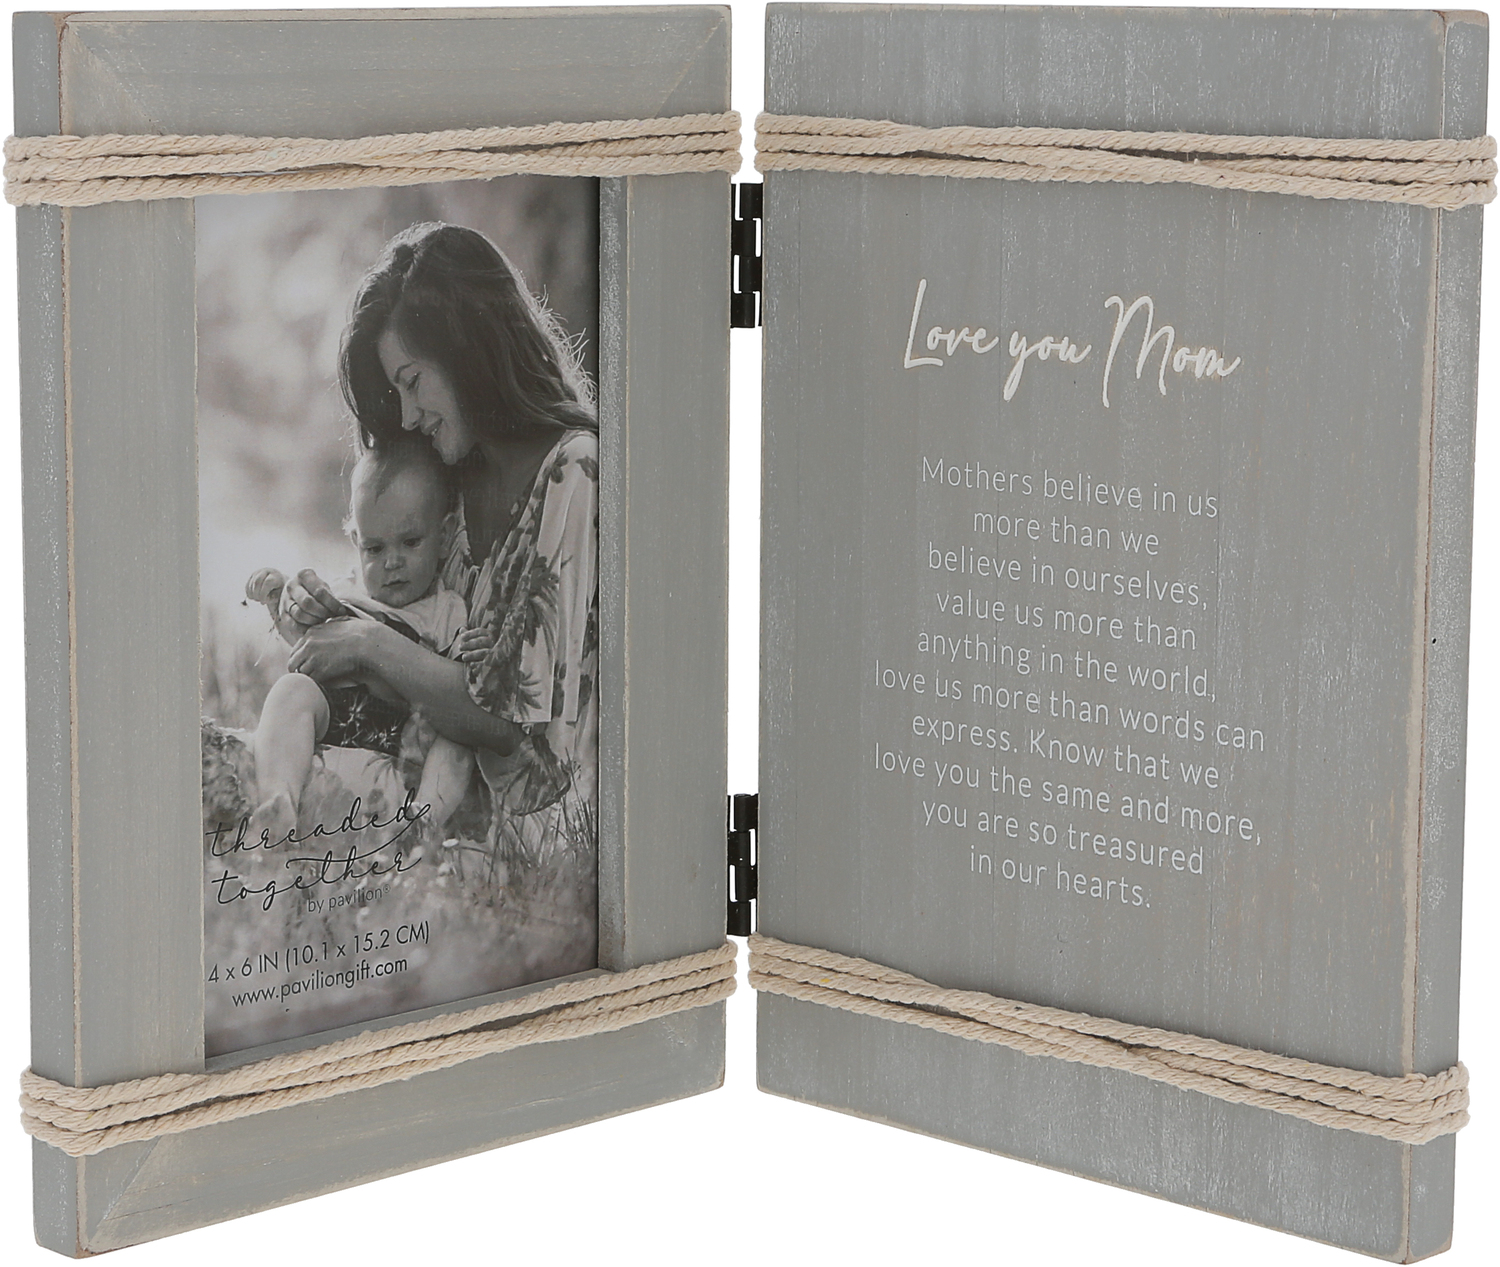 Love You Mom by Threaded Together - Love You Mom - 5.5" x 7.5" Hinged Sentiment Frame (Holds 4" x 6" Photo)